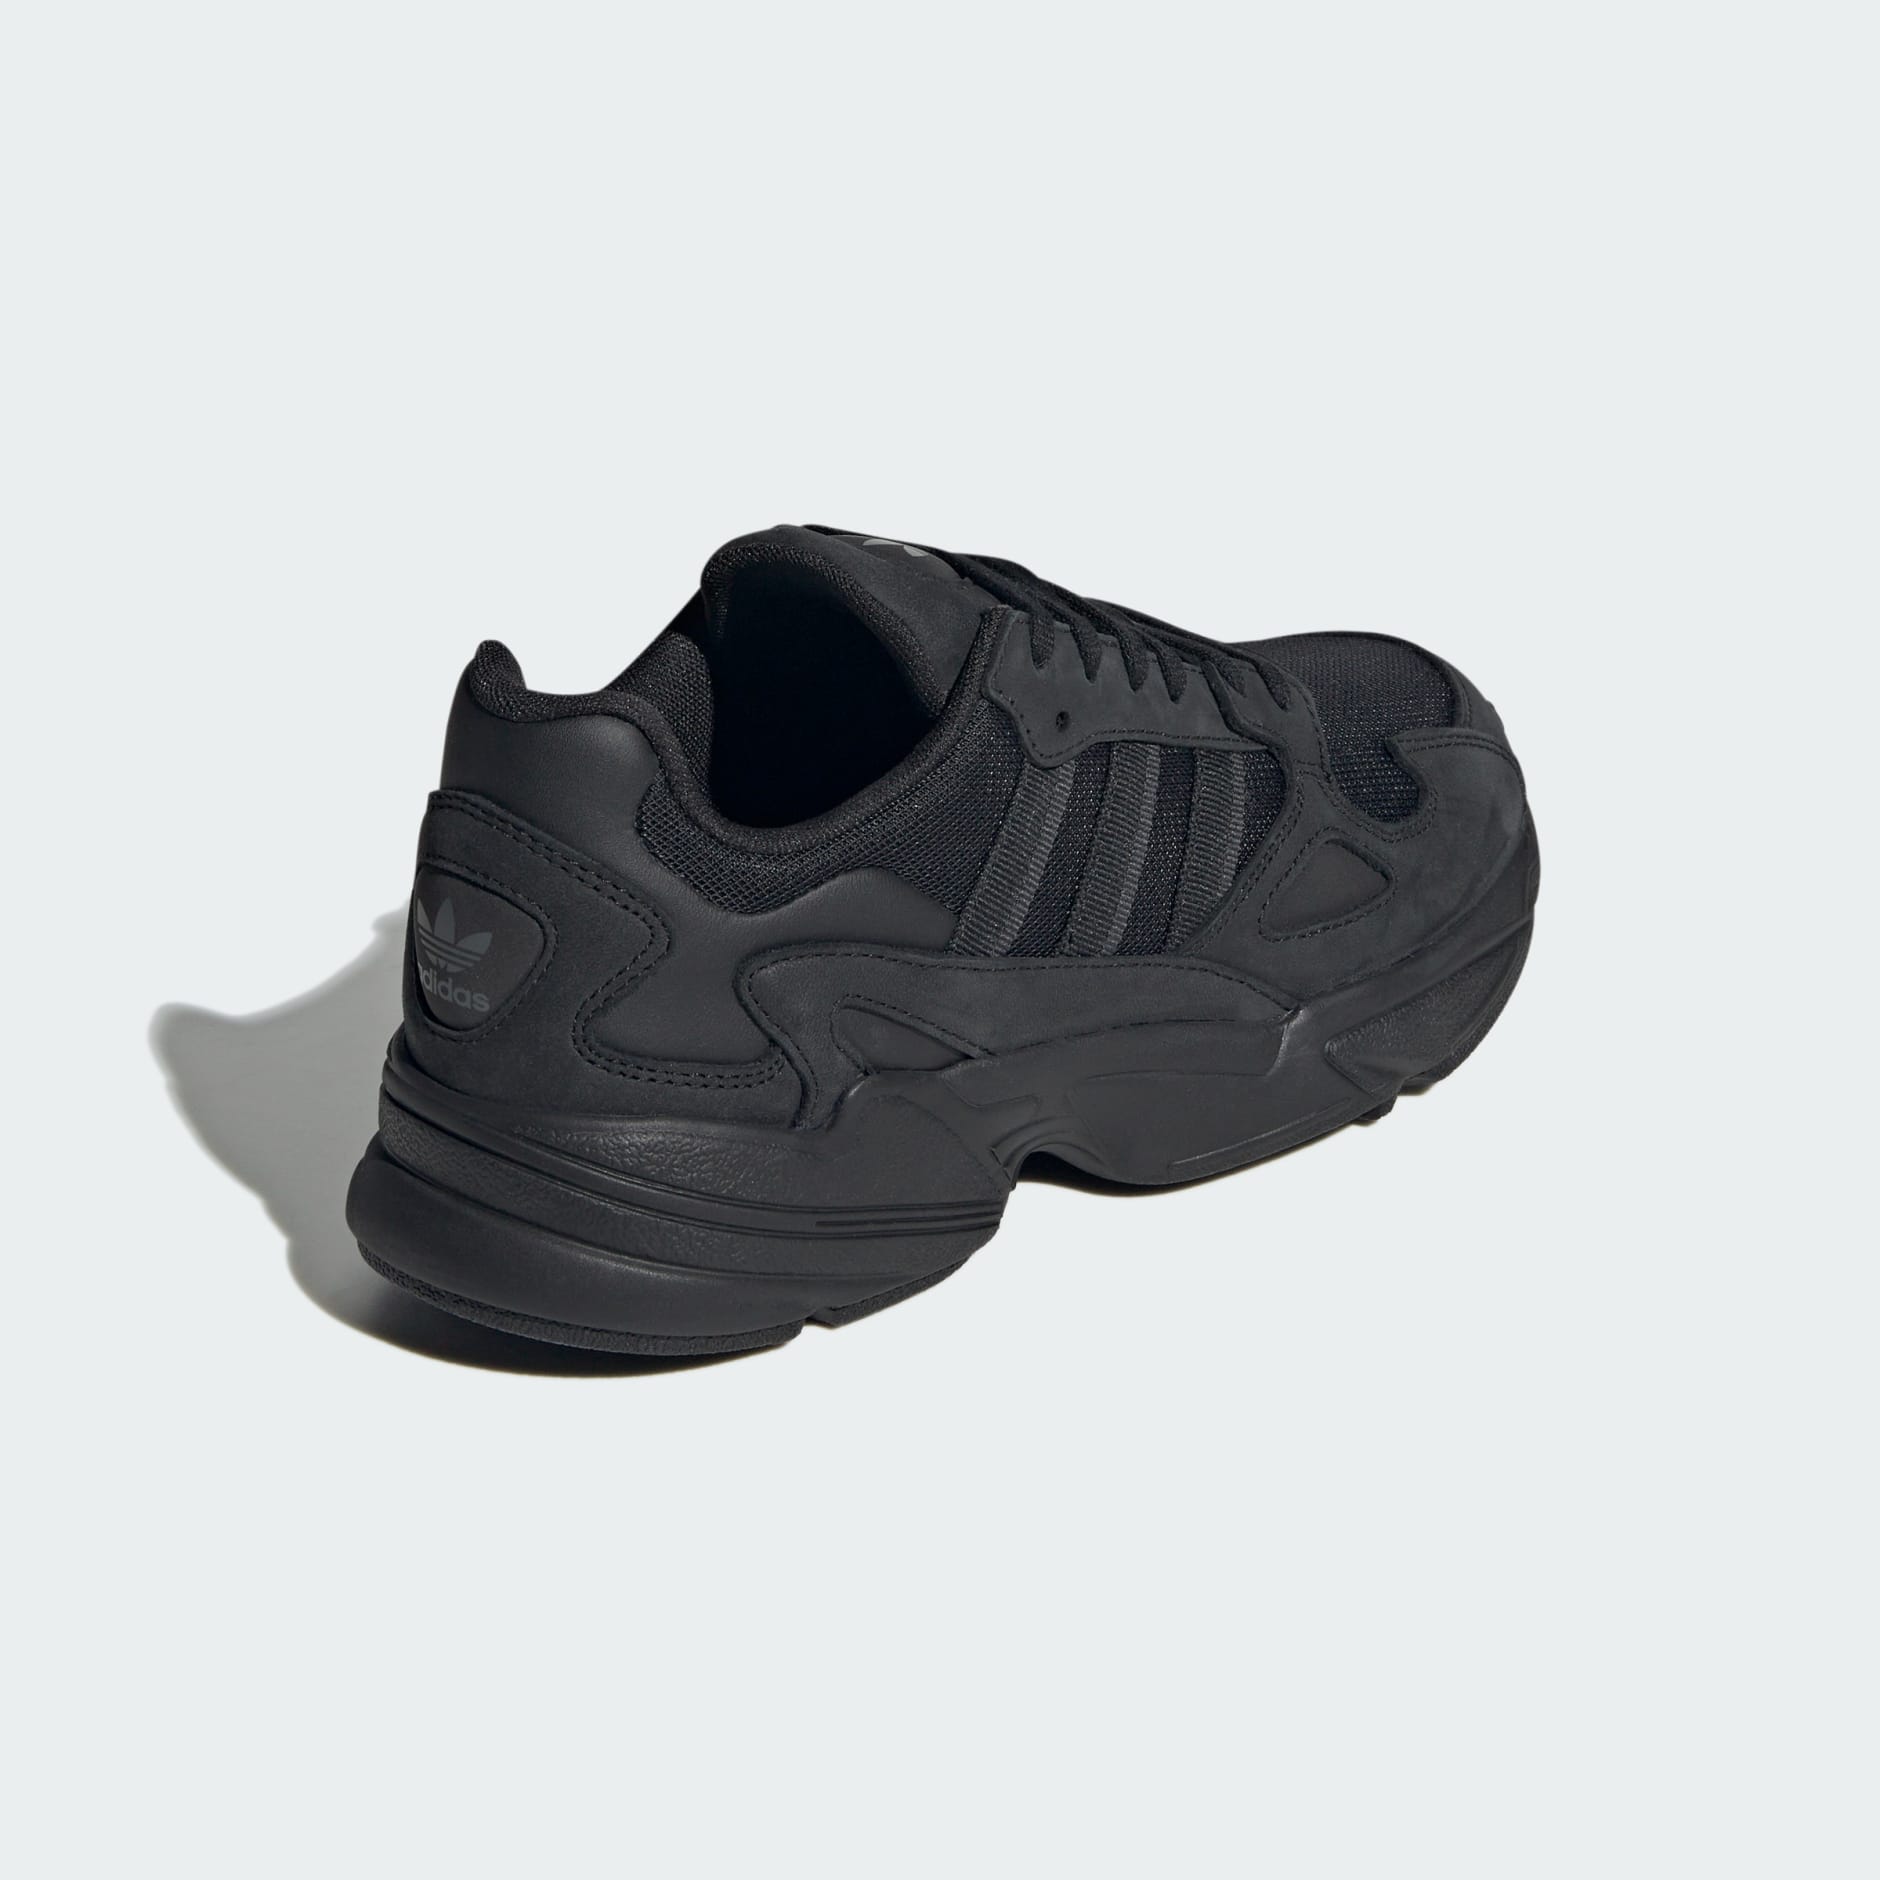 Shoes - Falcon Shoes - Black | adidas South Africa